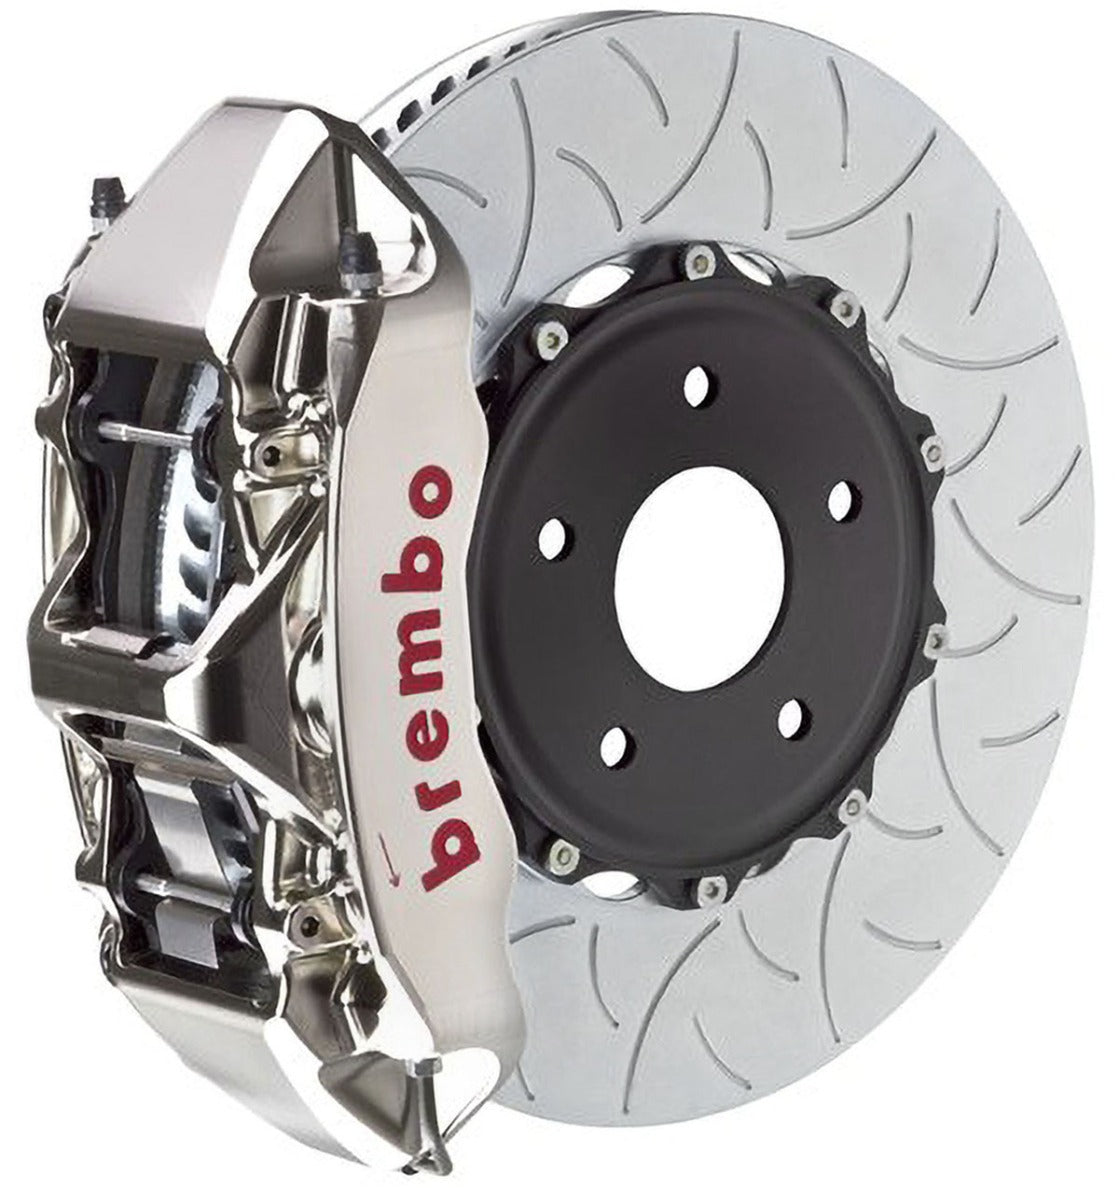 Brembo Type III rotors from Competition Motorsport excellent brake cooling for track days and racing BMW M2 M3 M4